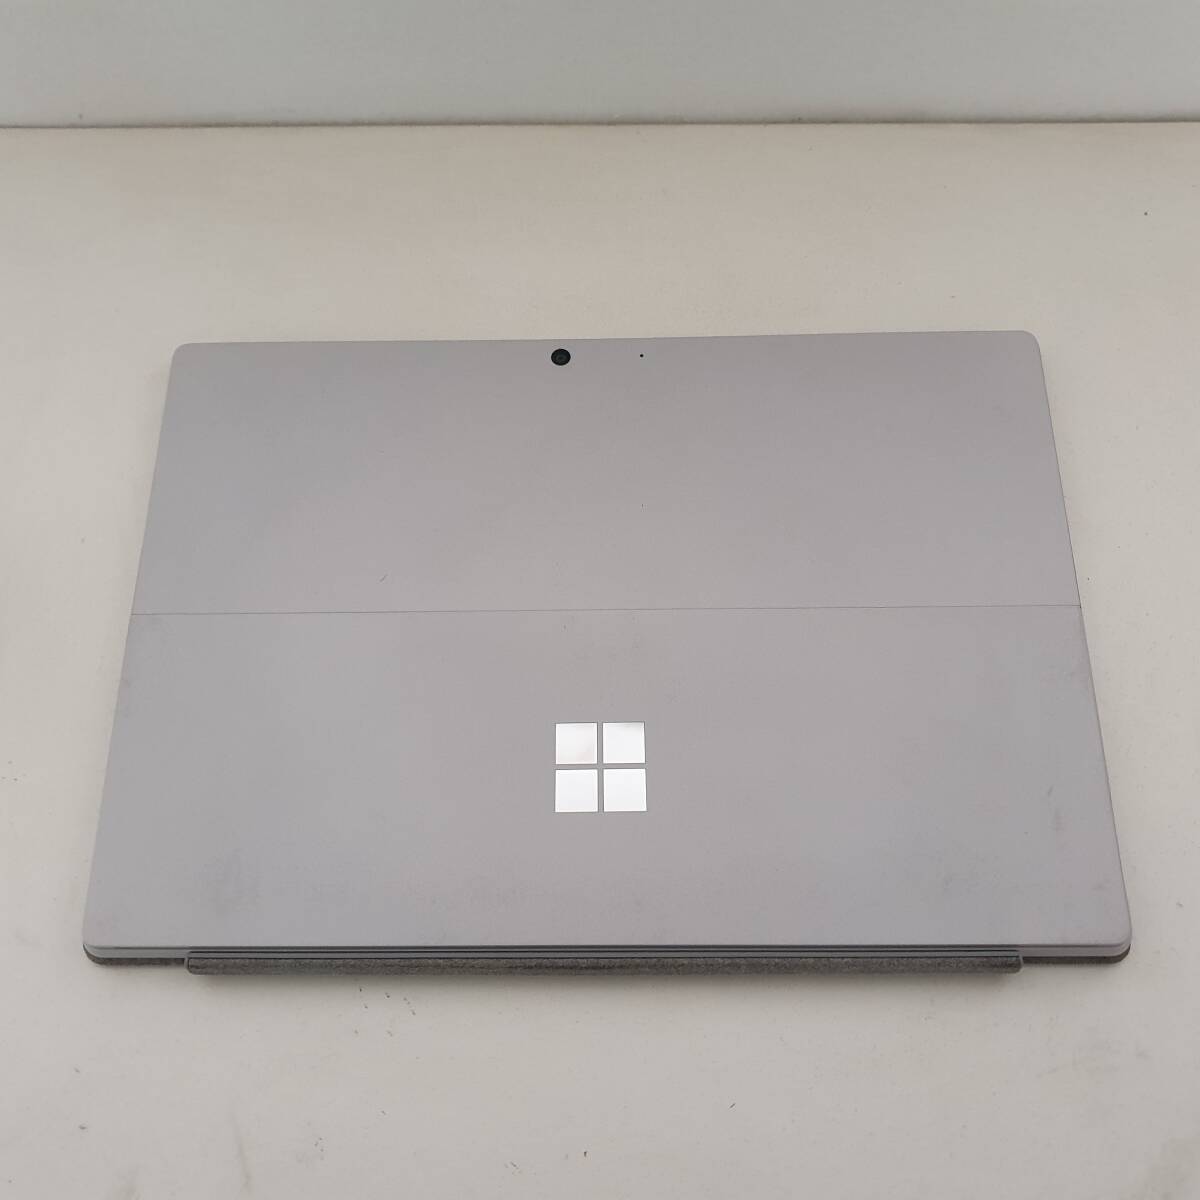 (852536) Surf .s/surface pro7+ / i5-1135G7 2.4Ghz /8GB/SSD 256GB/ Junk 